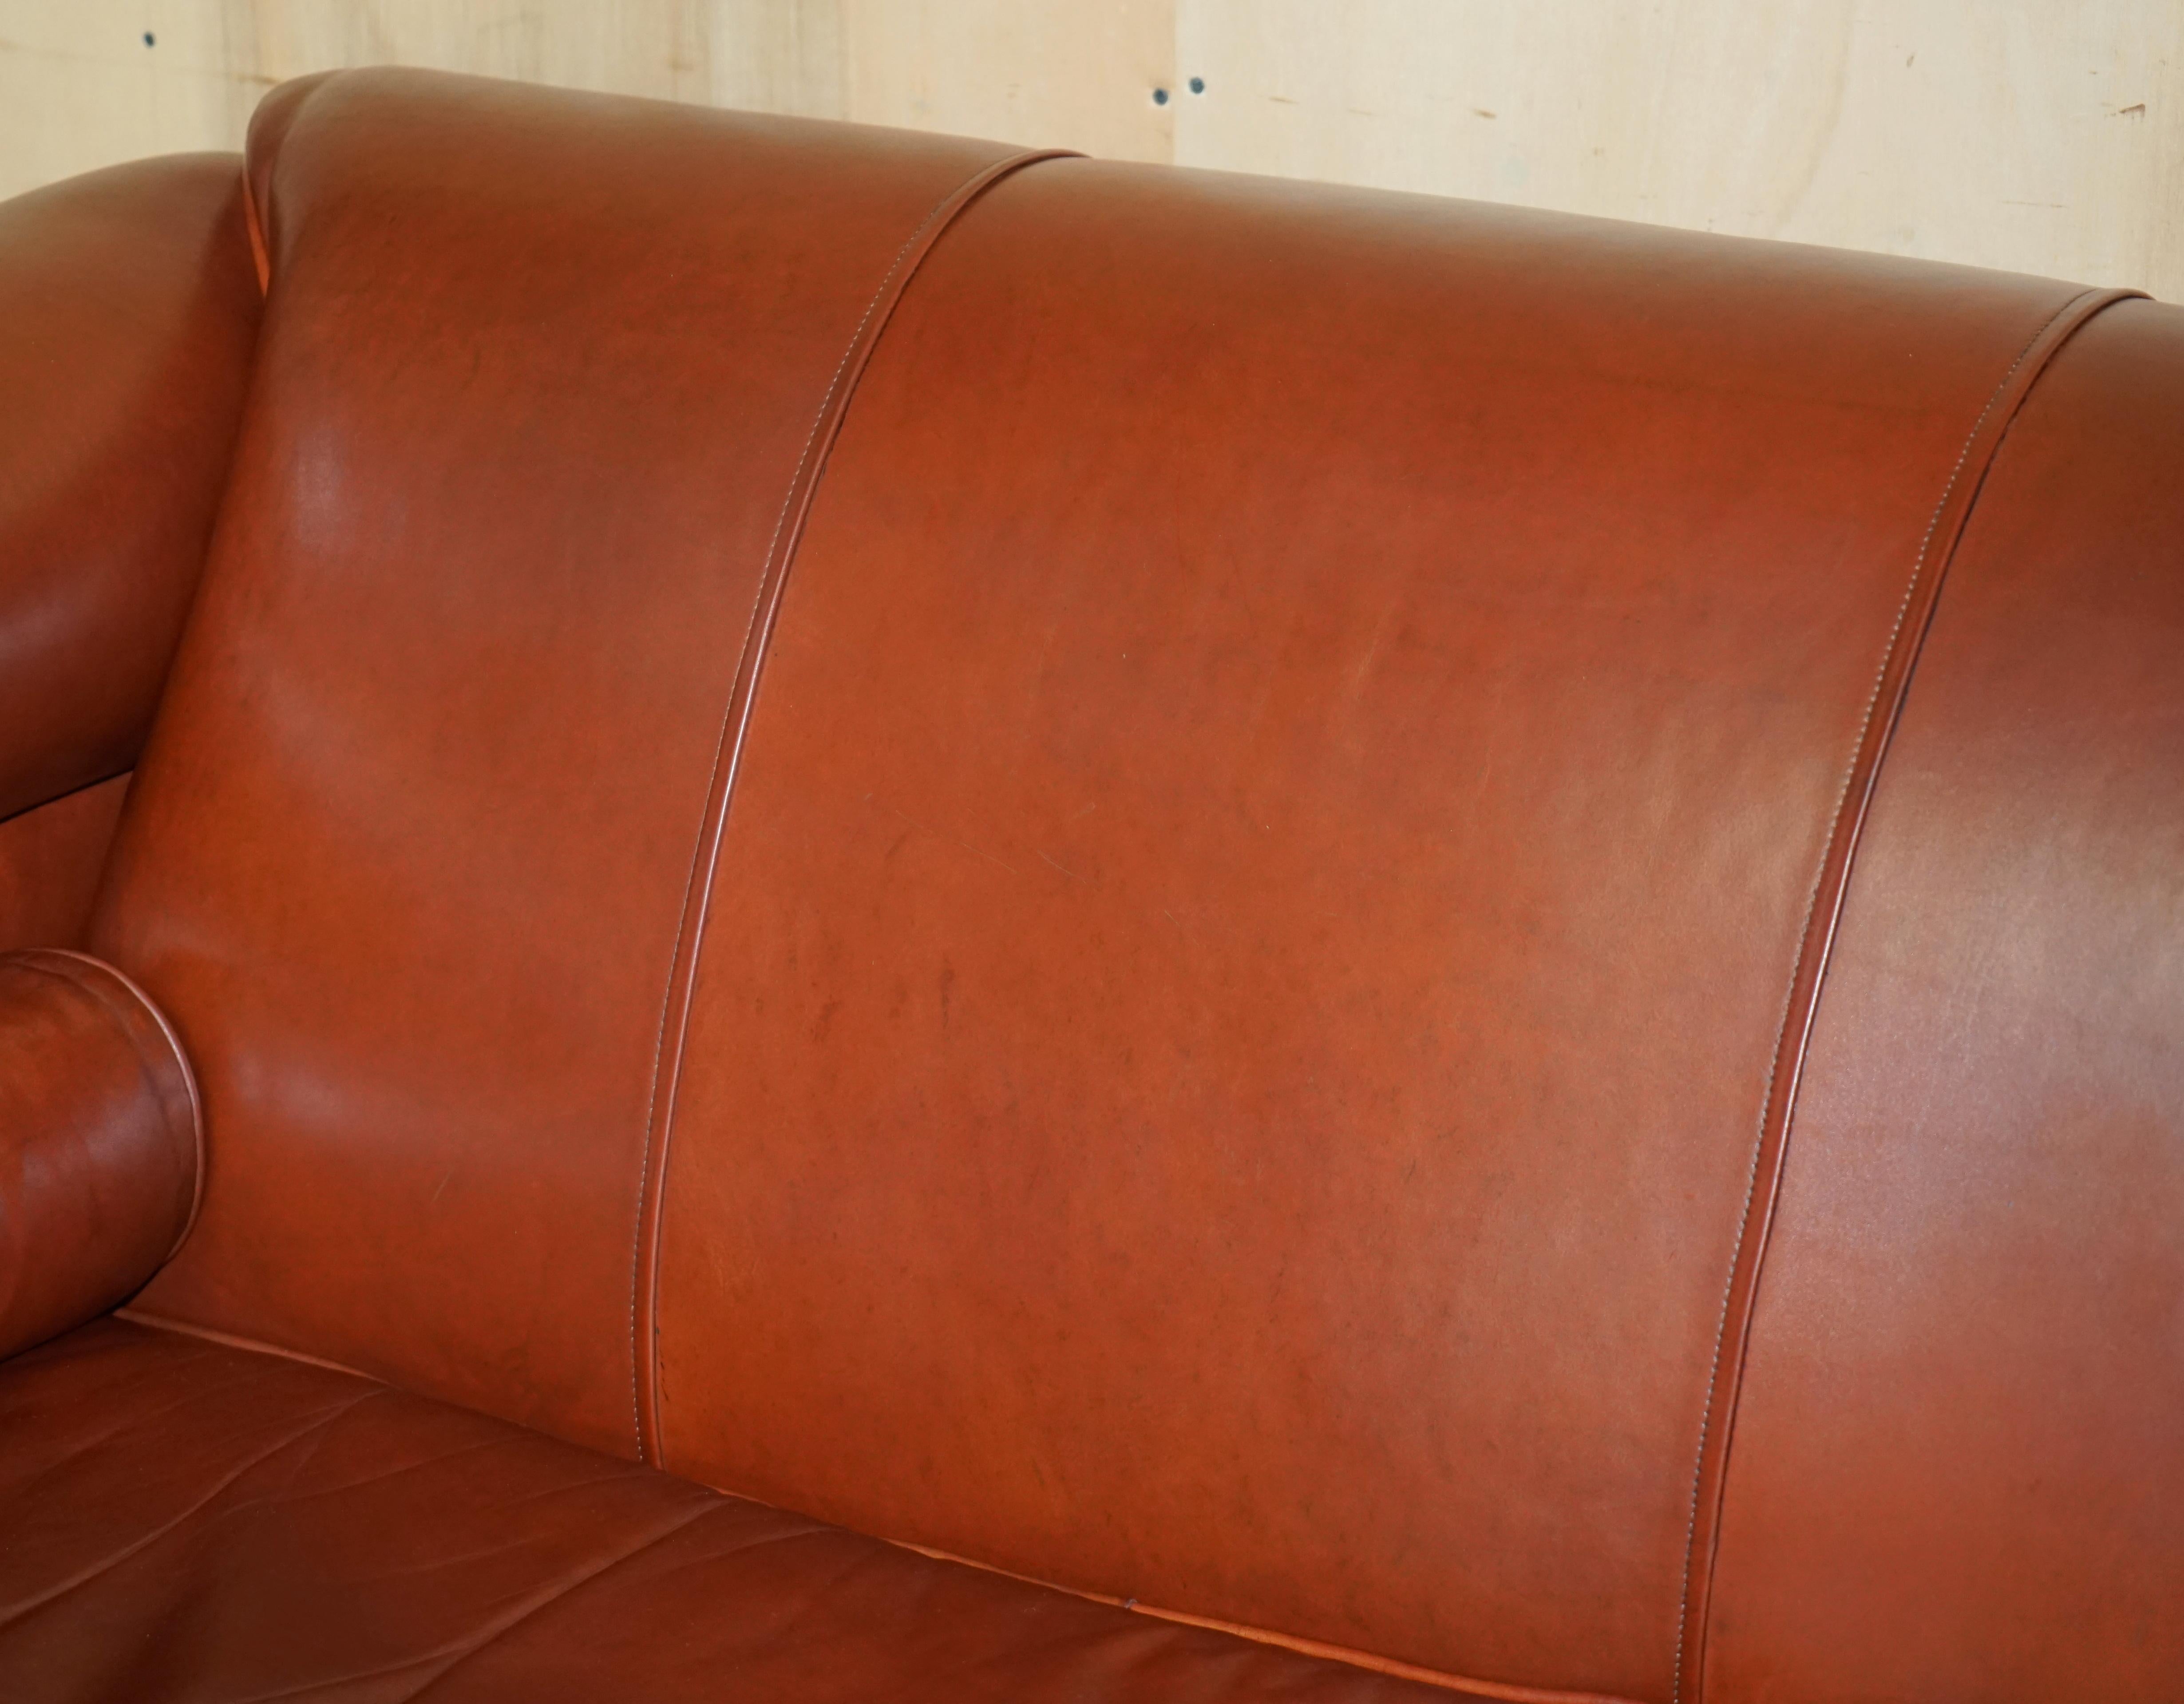 Hand-Crafted ViNTAGE CHESTNUT BROWN LEATHER LIBERTY'S ART NOUVEAU CLUB SOFA CARVED WOOD FRAMe For Sale